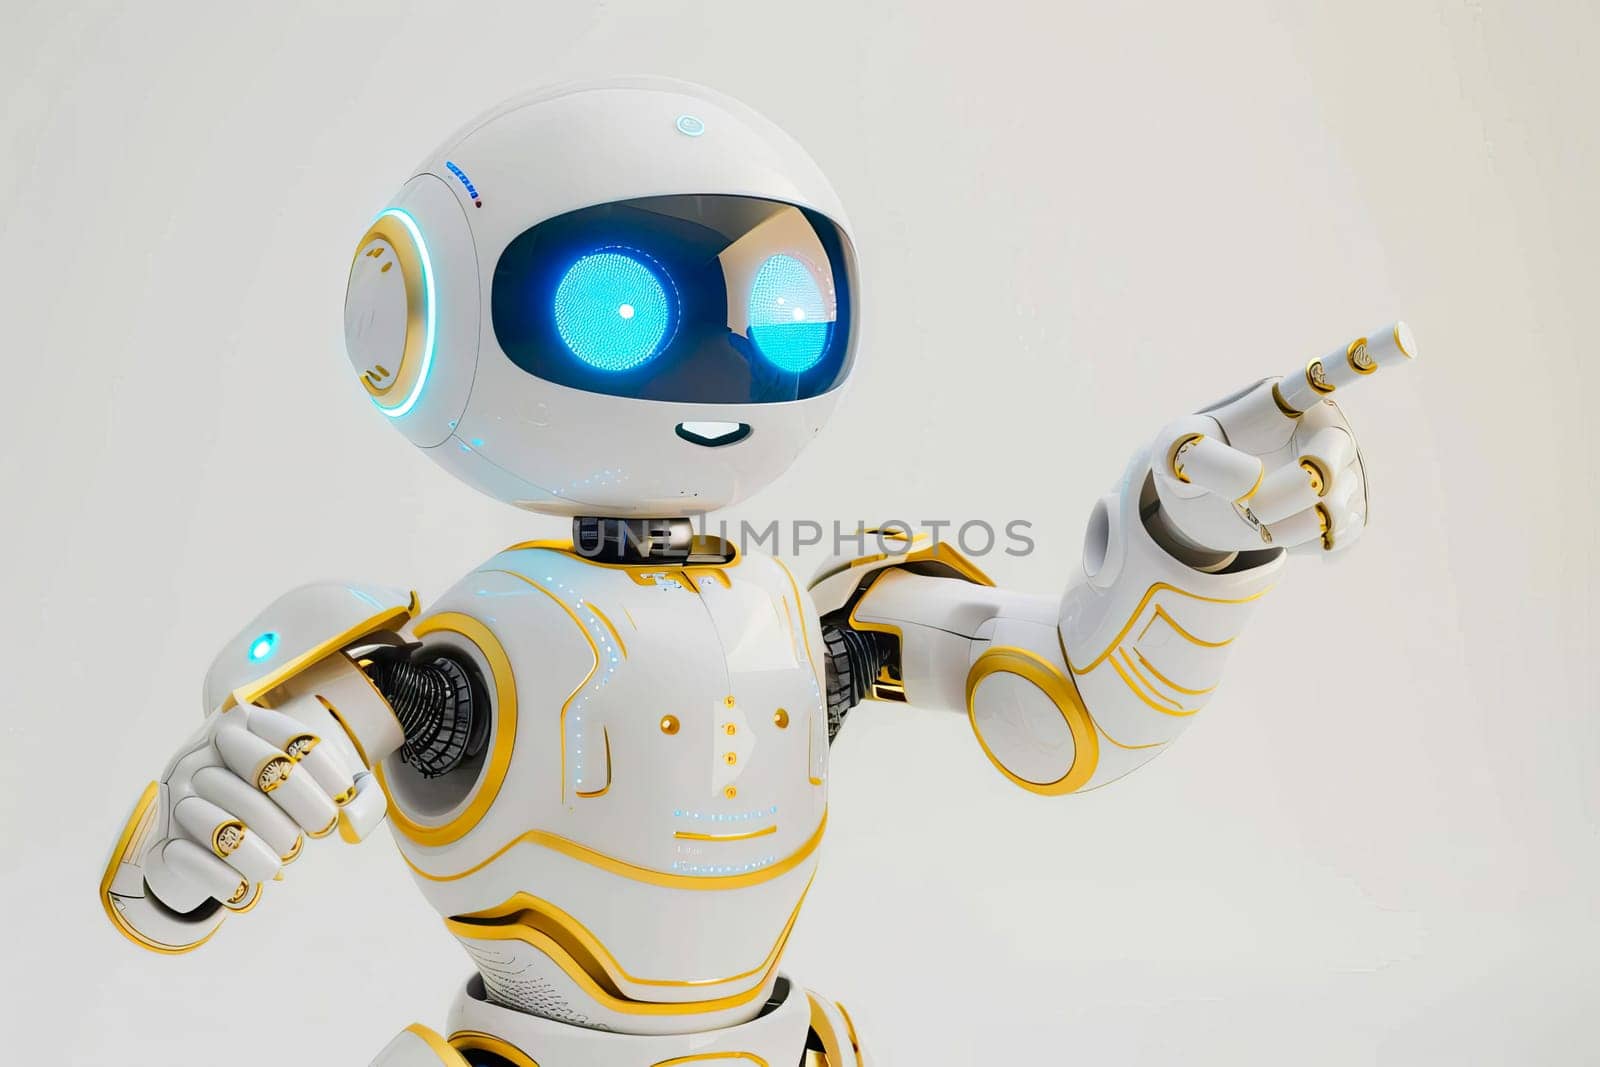 A white robot with blue eyes pointing at something.